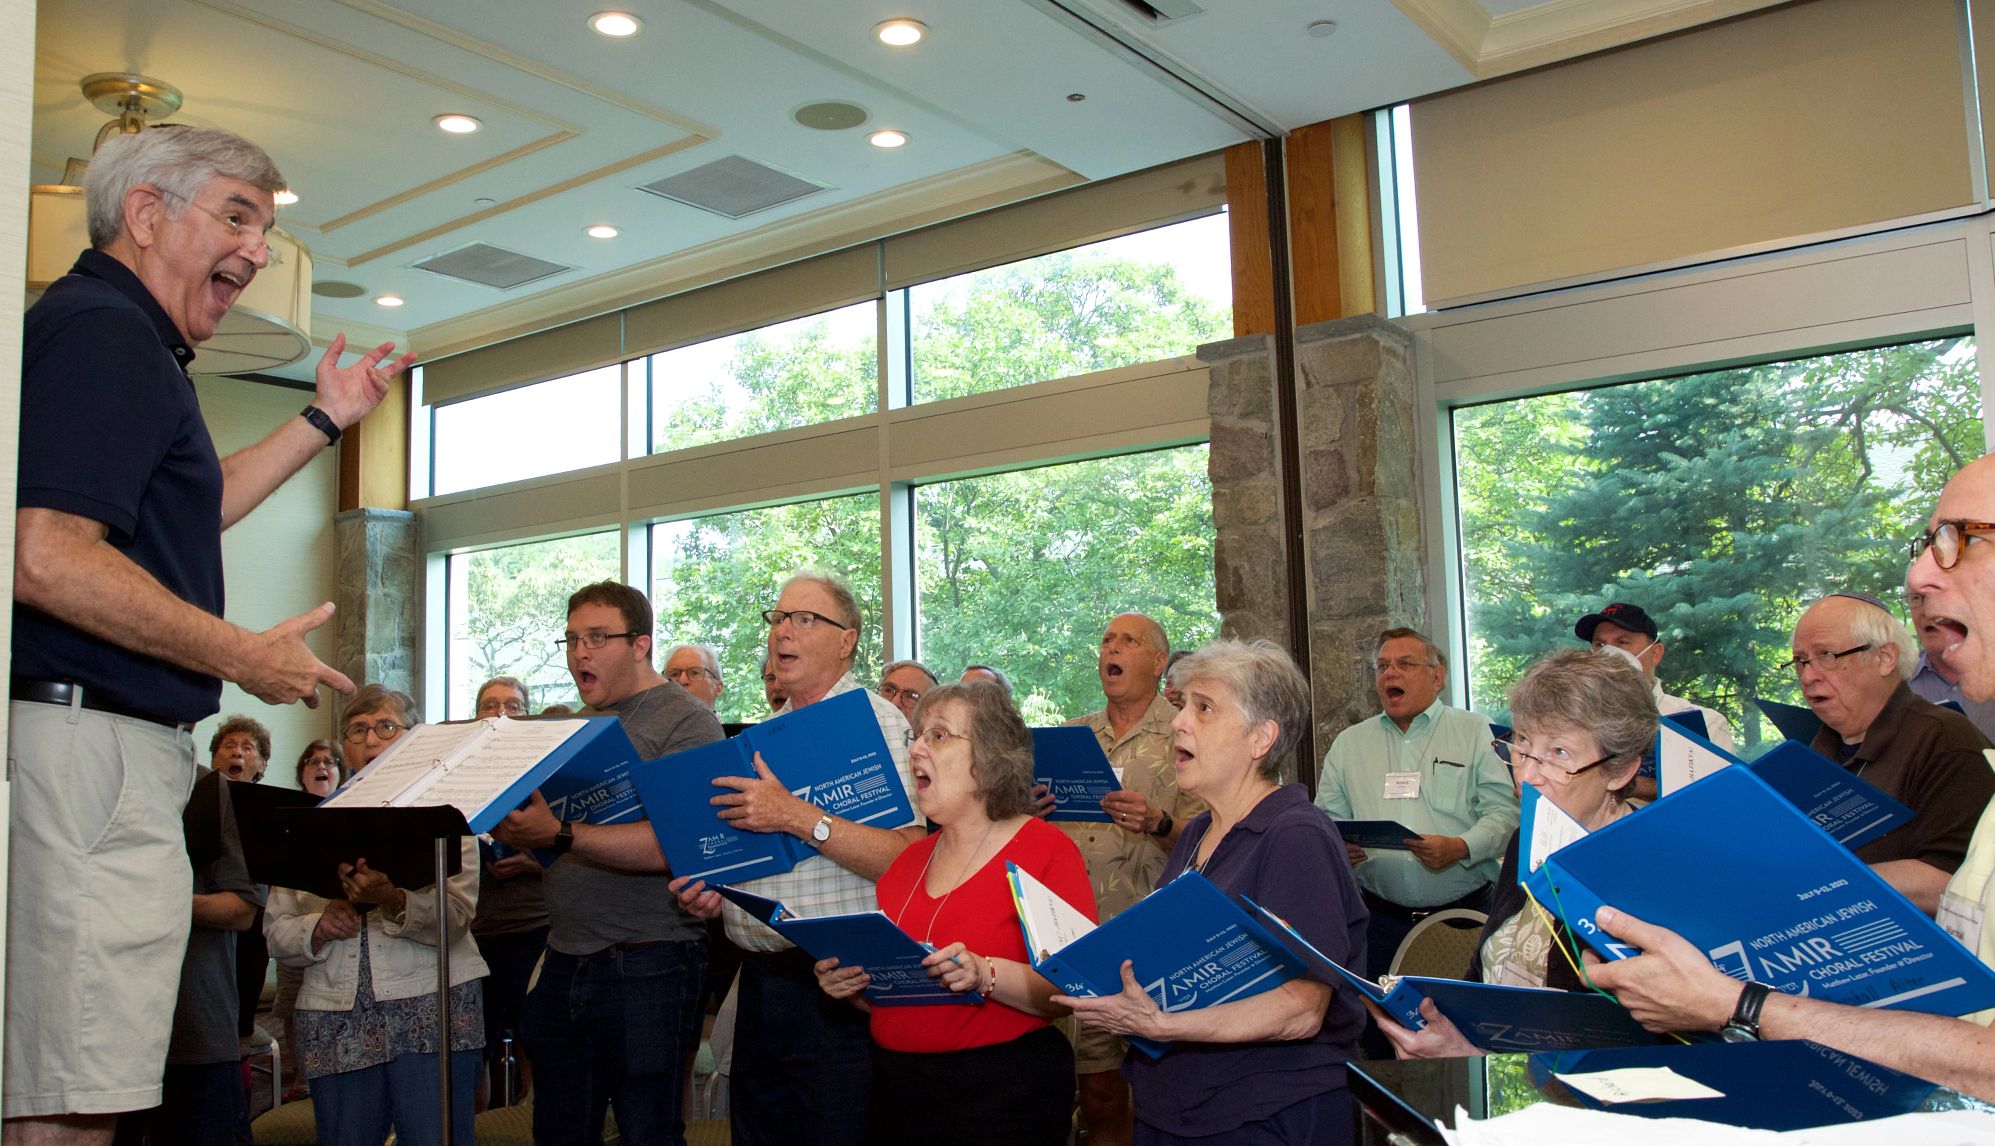 campers practice singing at the North American Jewish Choral Festival in Tarrytown, New York